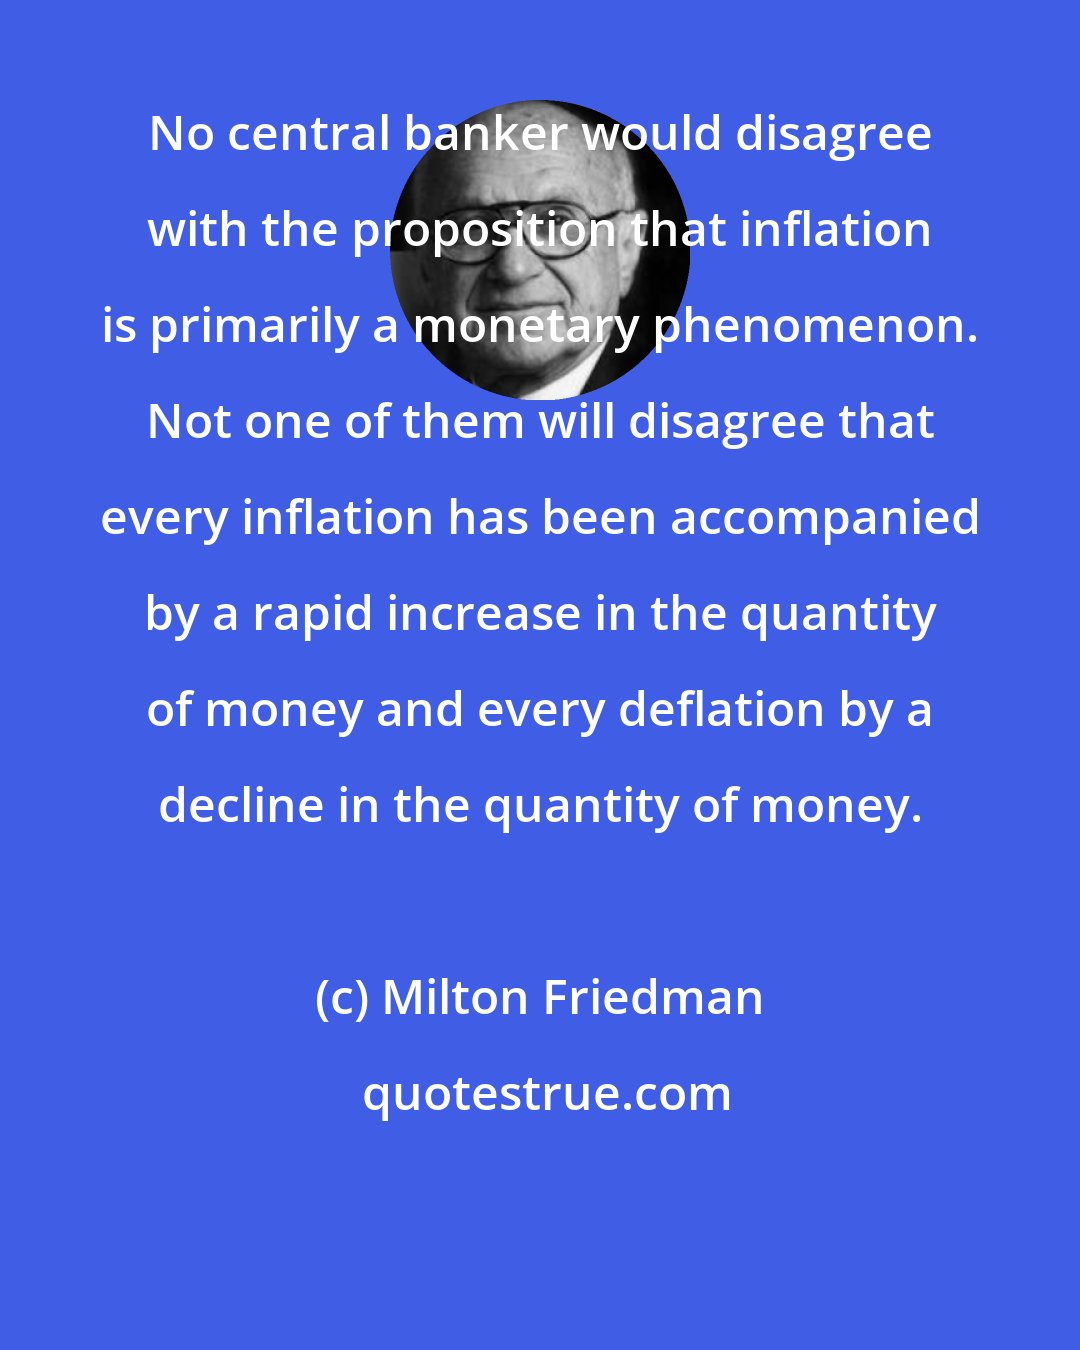 Milton Friedman: No central banker would disagree with the proposition that inflation is primarily a monetary phenomenon. Not one of them will disagree that every inflation has been accompanied by a rapid increase in the quantity of money and every deflation by a decline in the quantity of money.